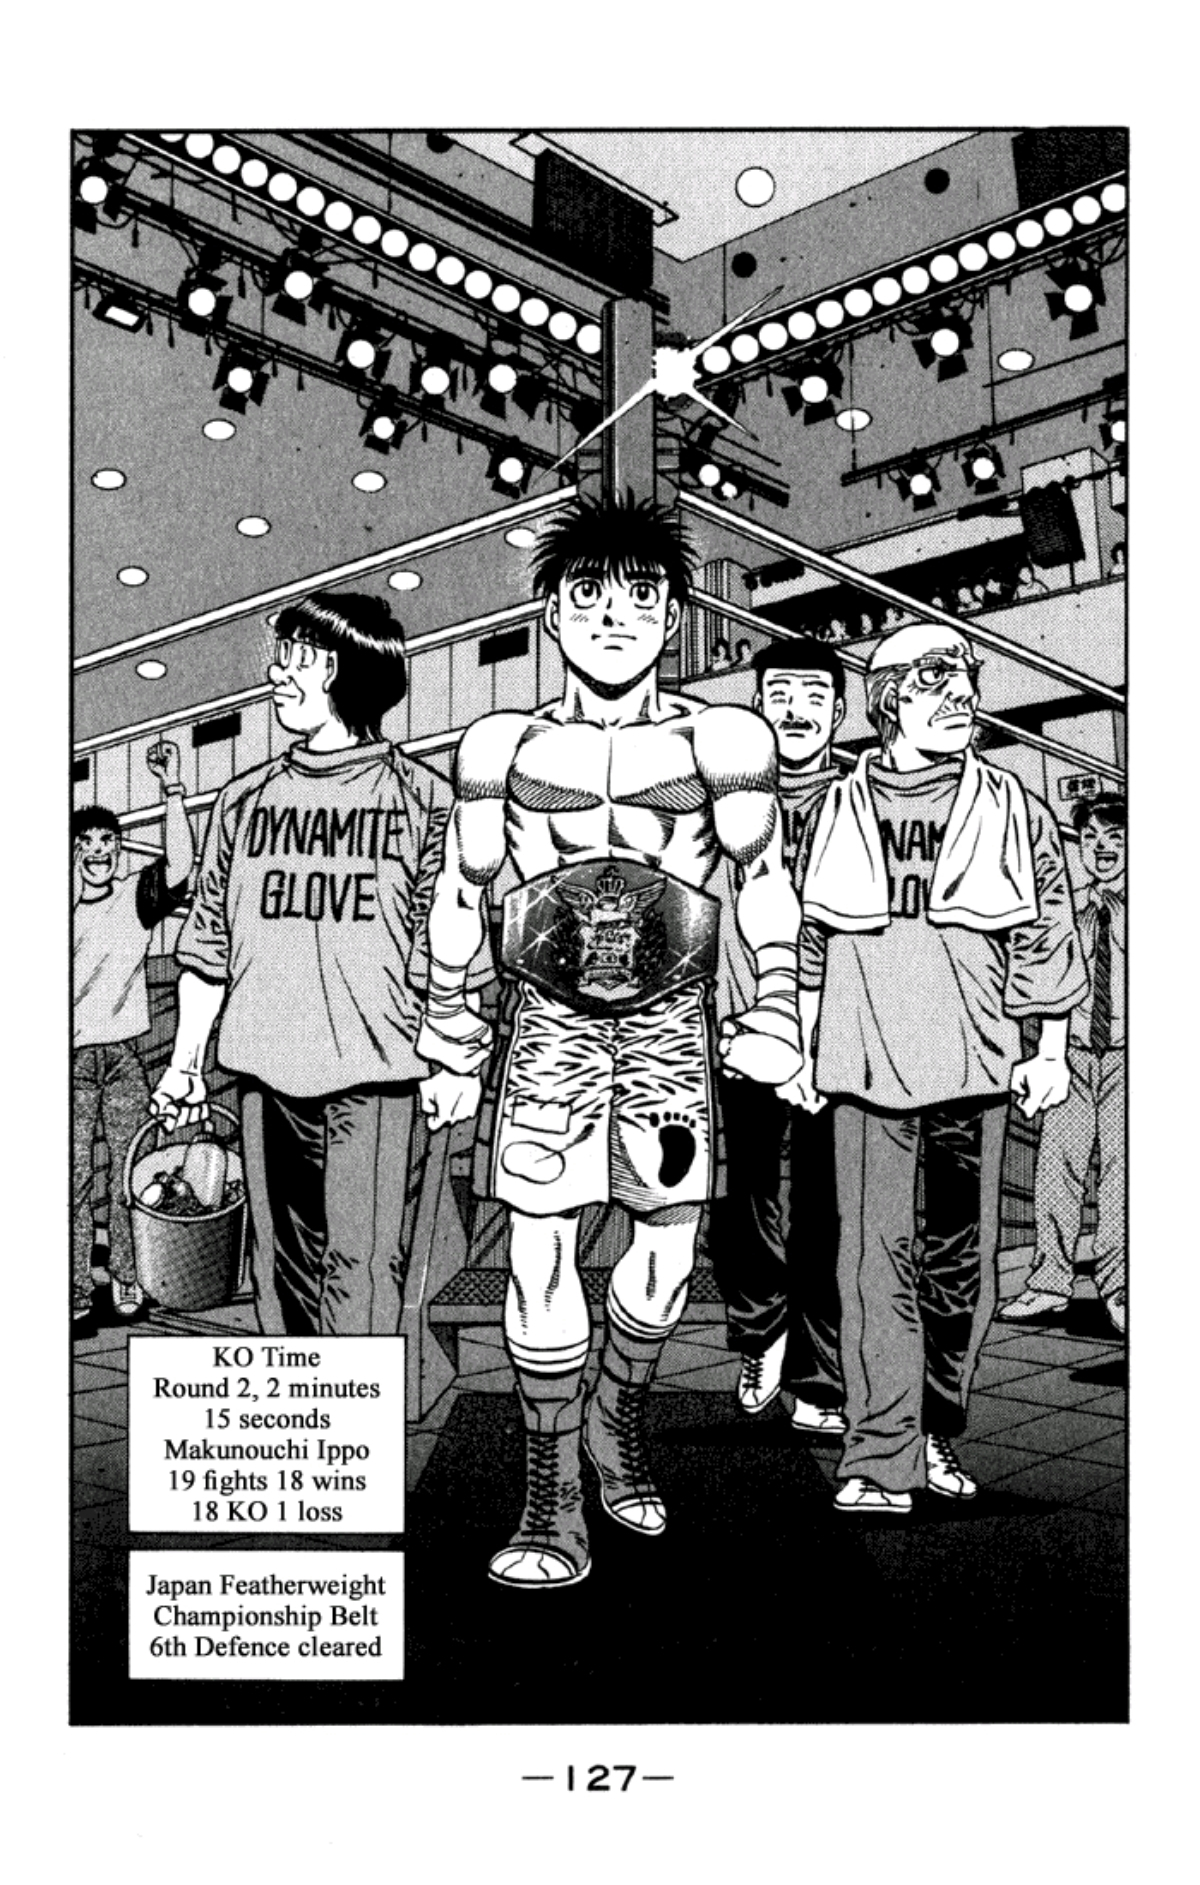 A low angle shot of Ippo walking proudly away from the ring, championship belt around his waist. Ippo's record is 19 fights, 18 wins, 1 loss. 